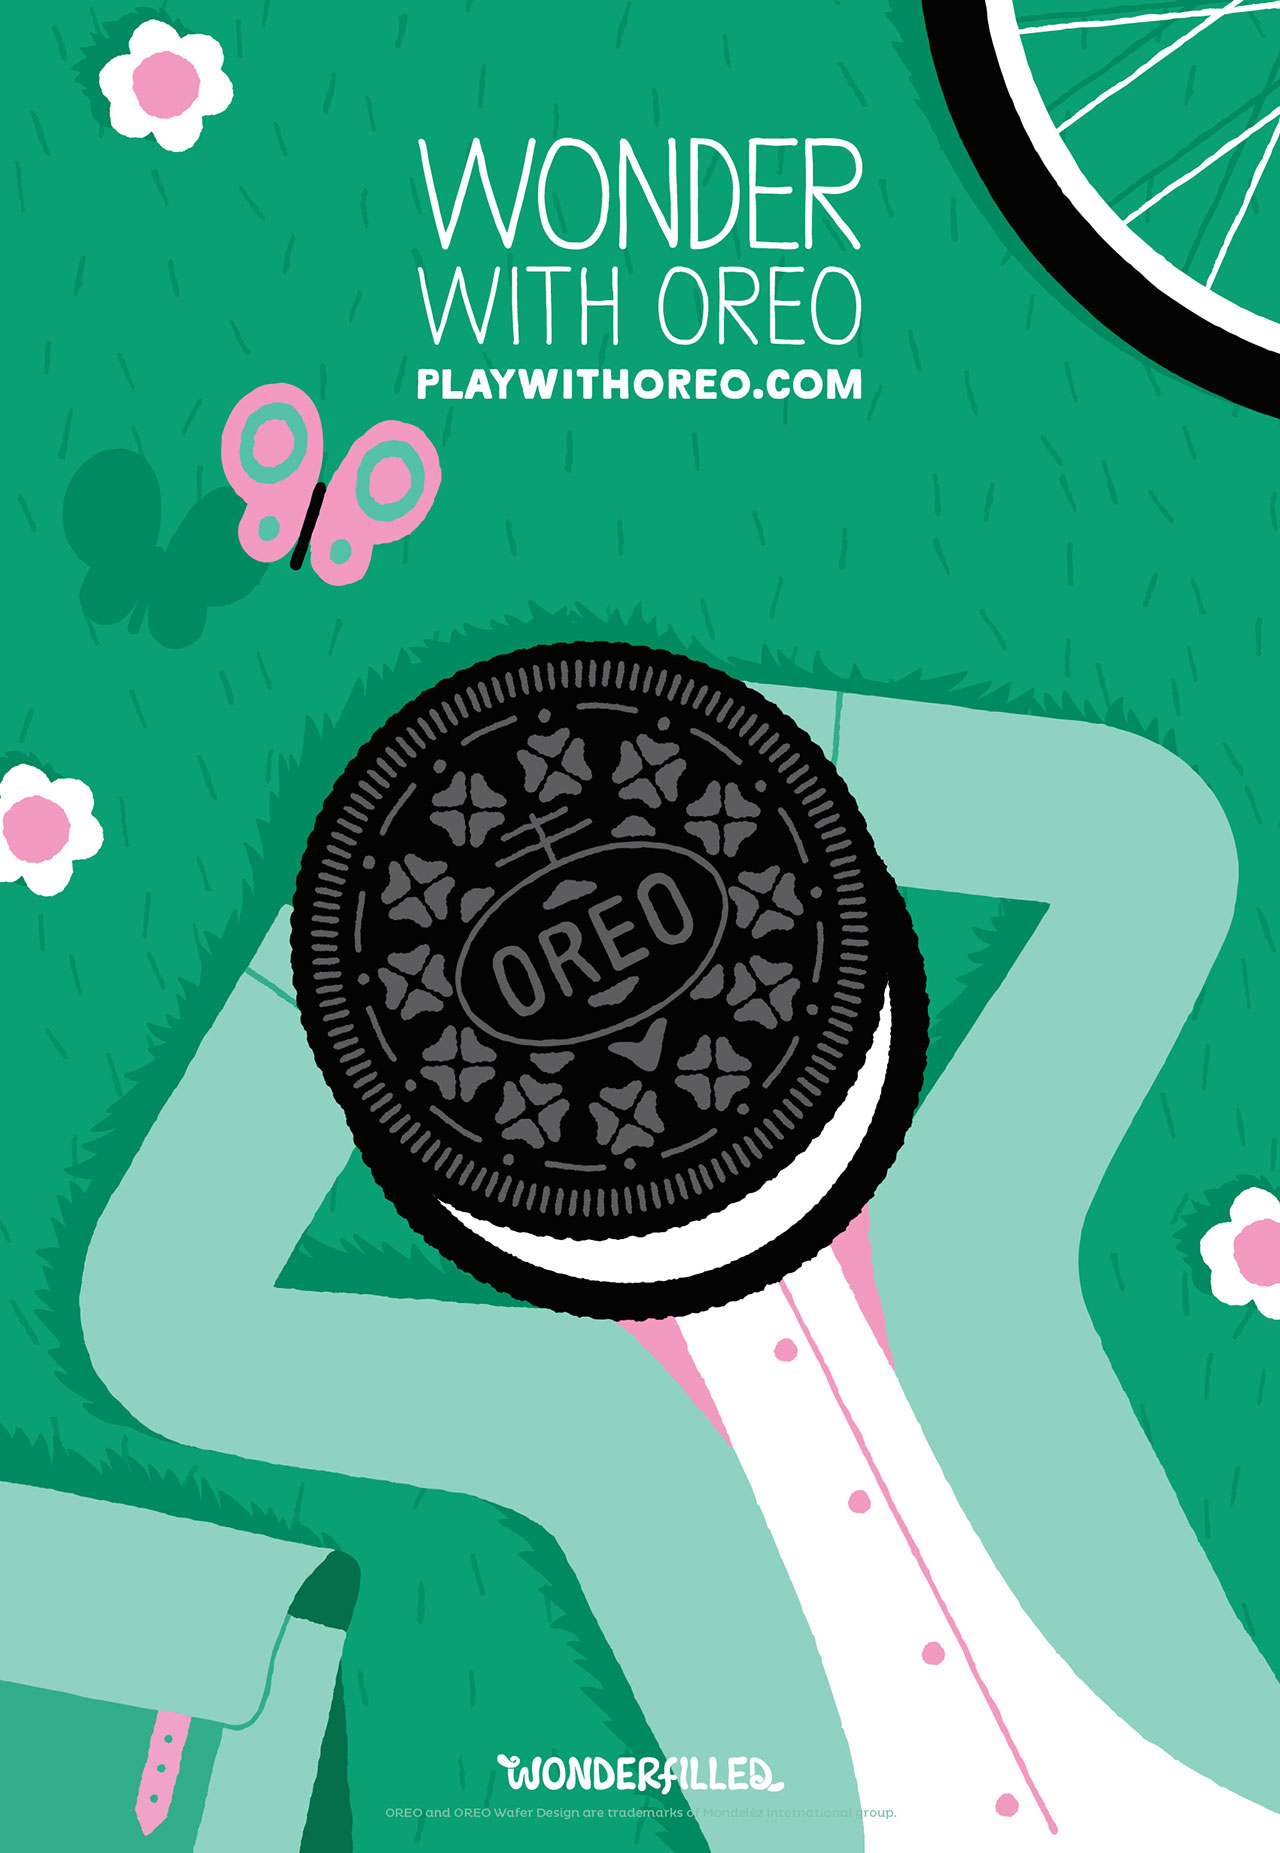 Oreo Gets 10 Artists to Produce Beautifully Dreamy Outdoor